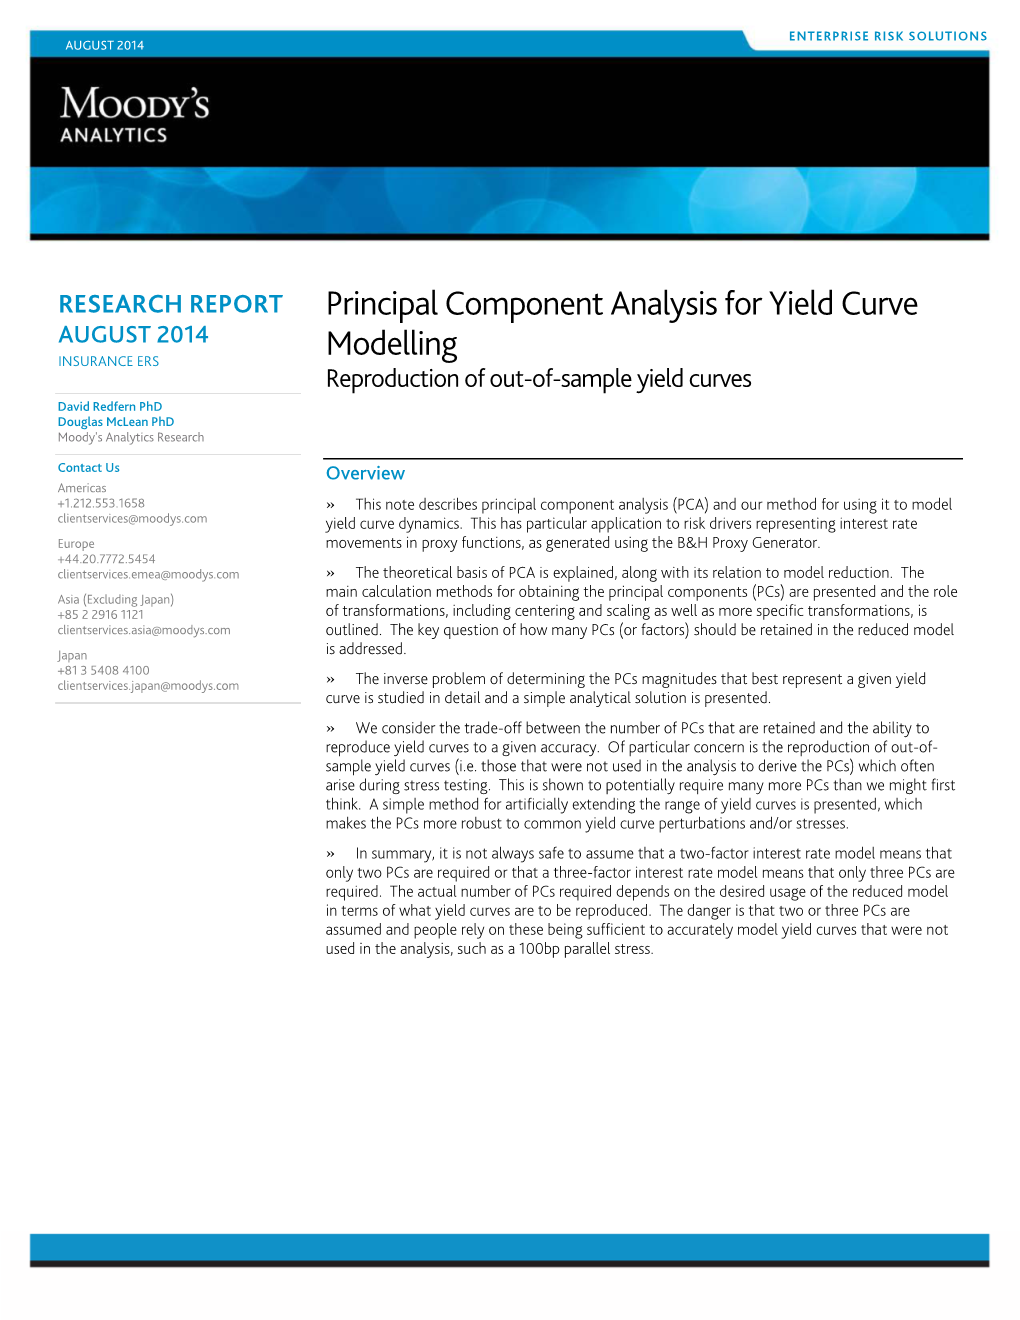 Principal Component Analysis for Yield Curve